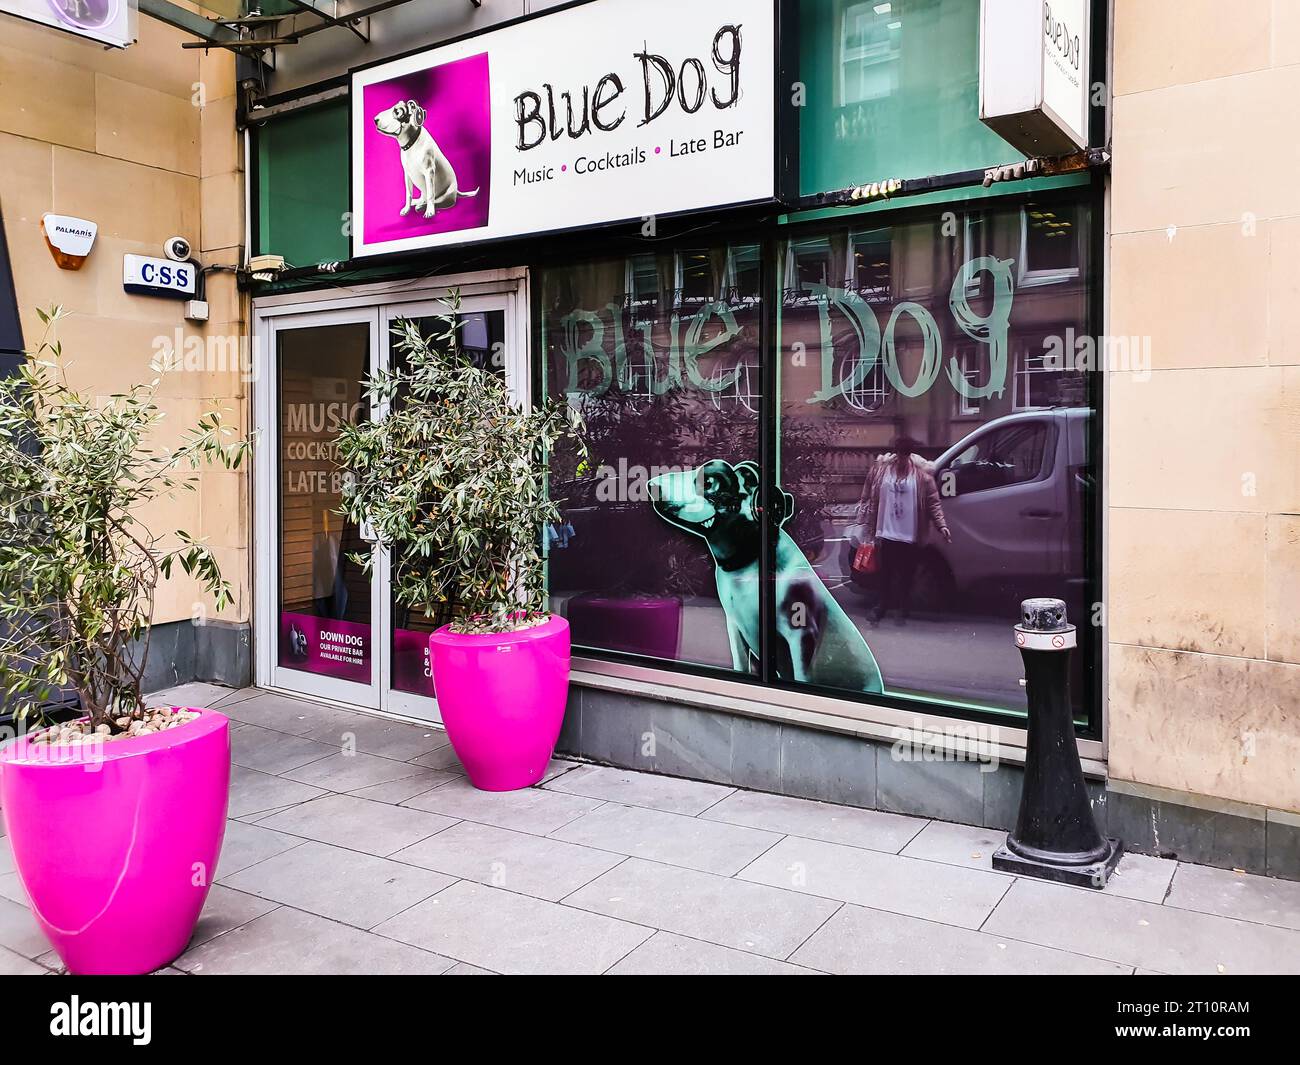 Glasgow, Lanarkshire / Scotland UK – 02 06 2020: exterior of Blue Dog Bar for classic contemporary cocktails and live jazz with well-worn night time c Stock Photo